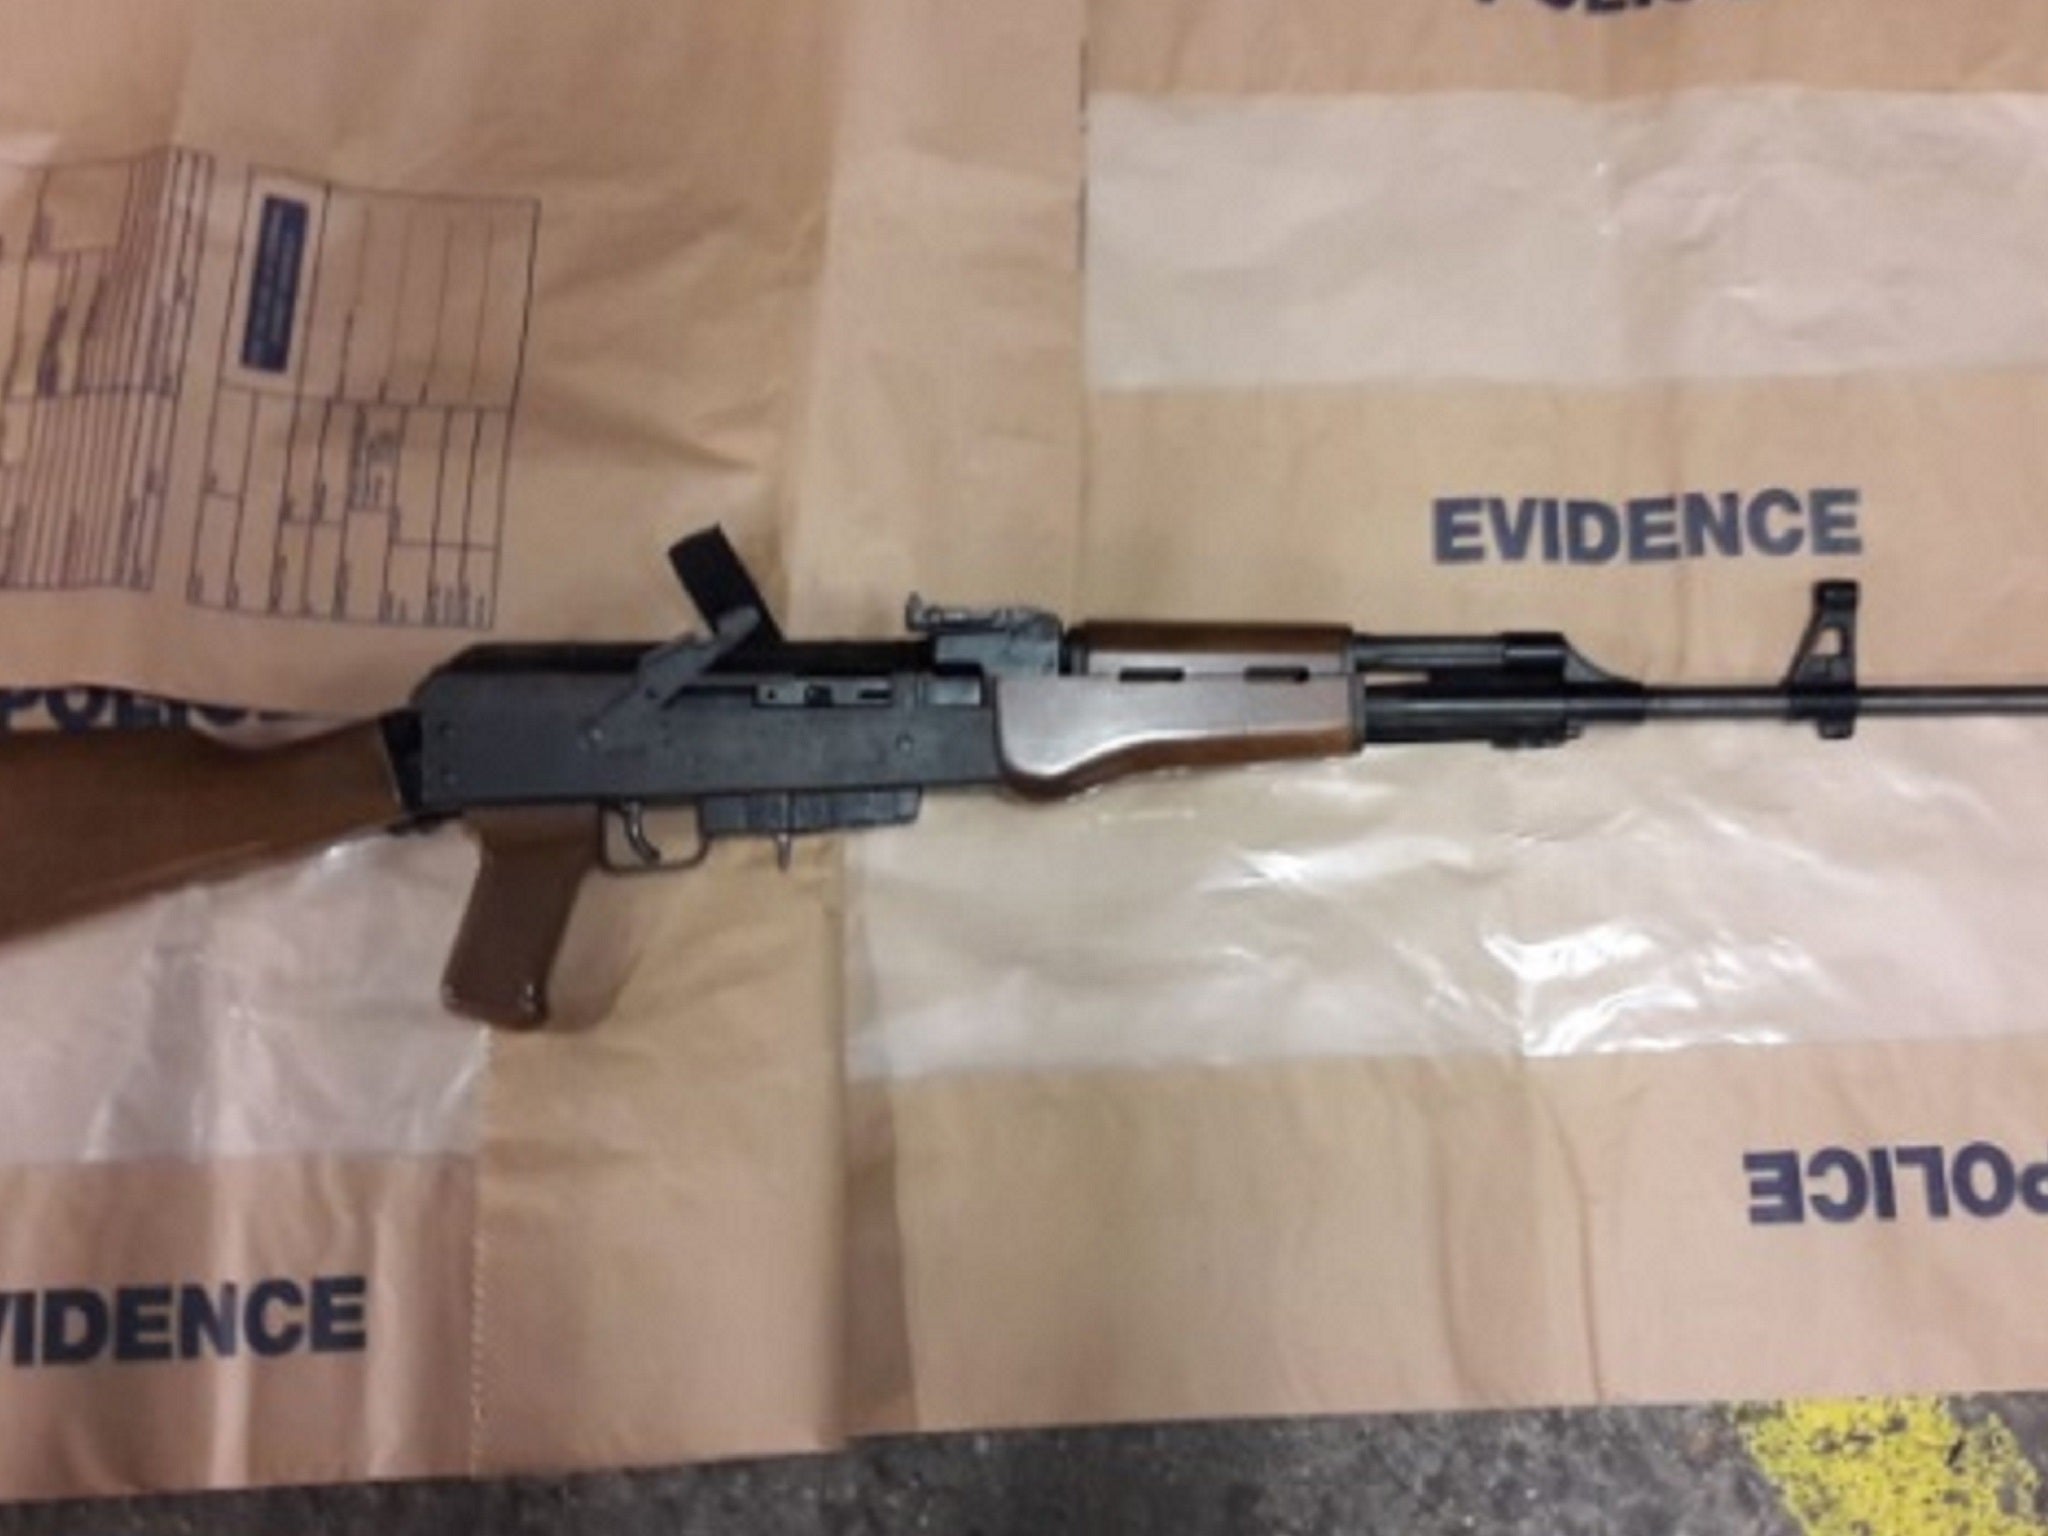 Two men, aged 77 and 50, have been arrested after police found a loaded Armi-Jager AP80 assault rifle in the boot of a car during a stop and search in Peckham, south London, on 7 March 2019.